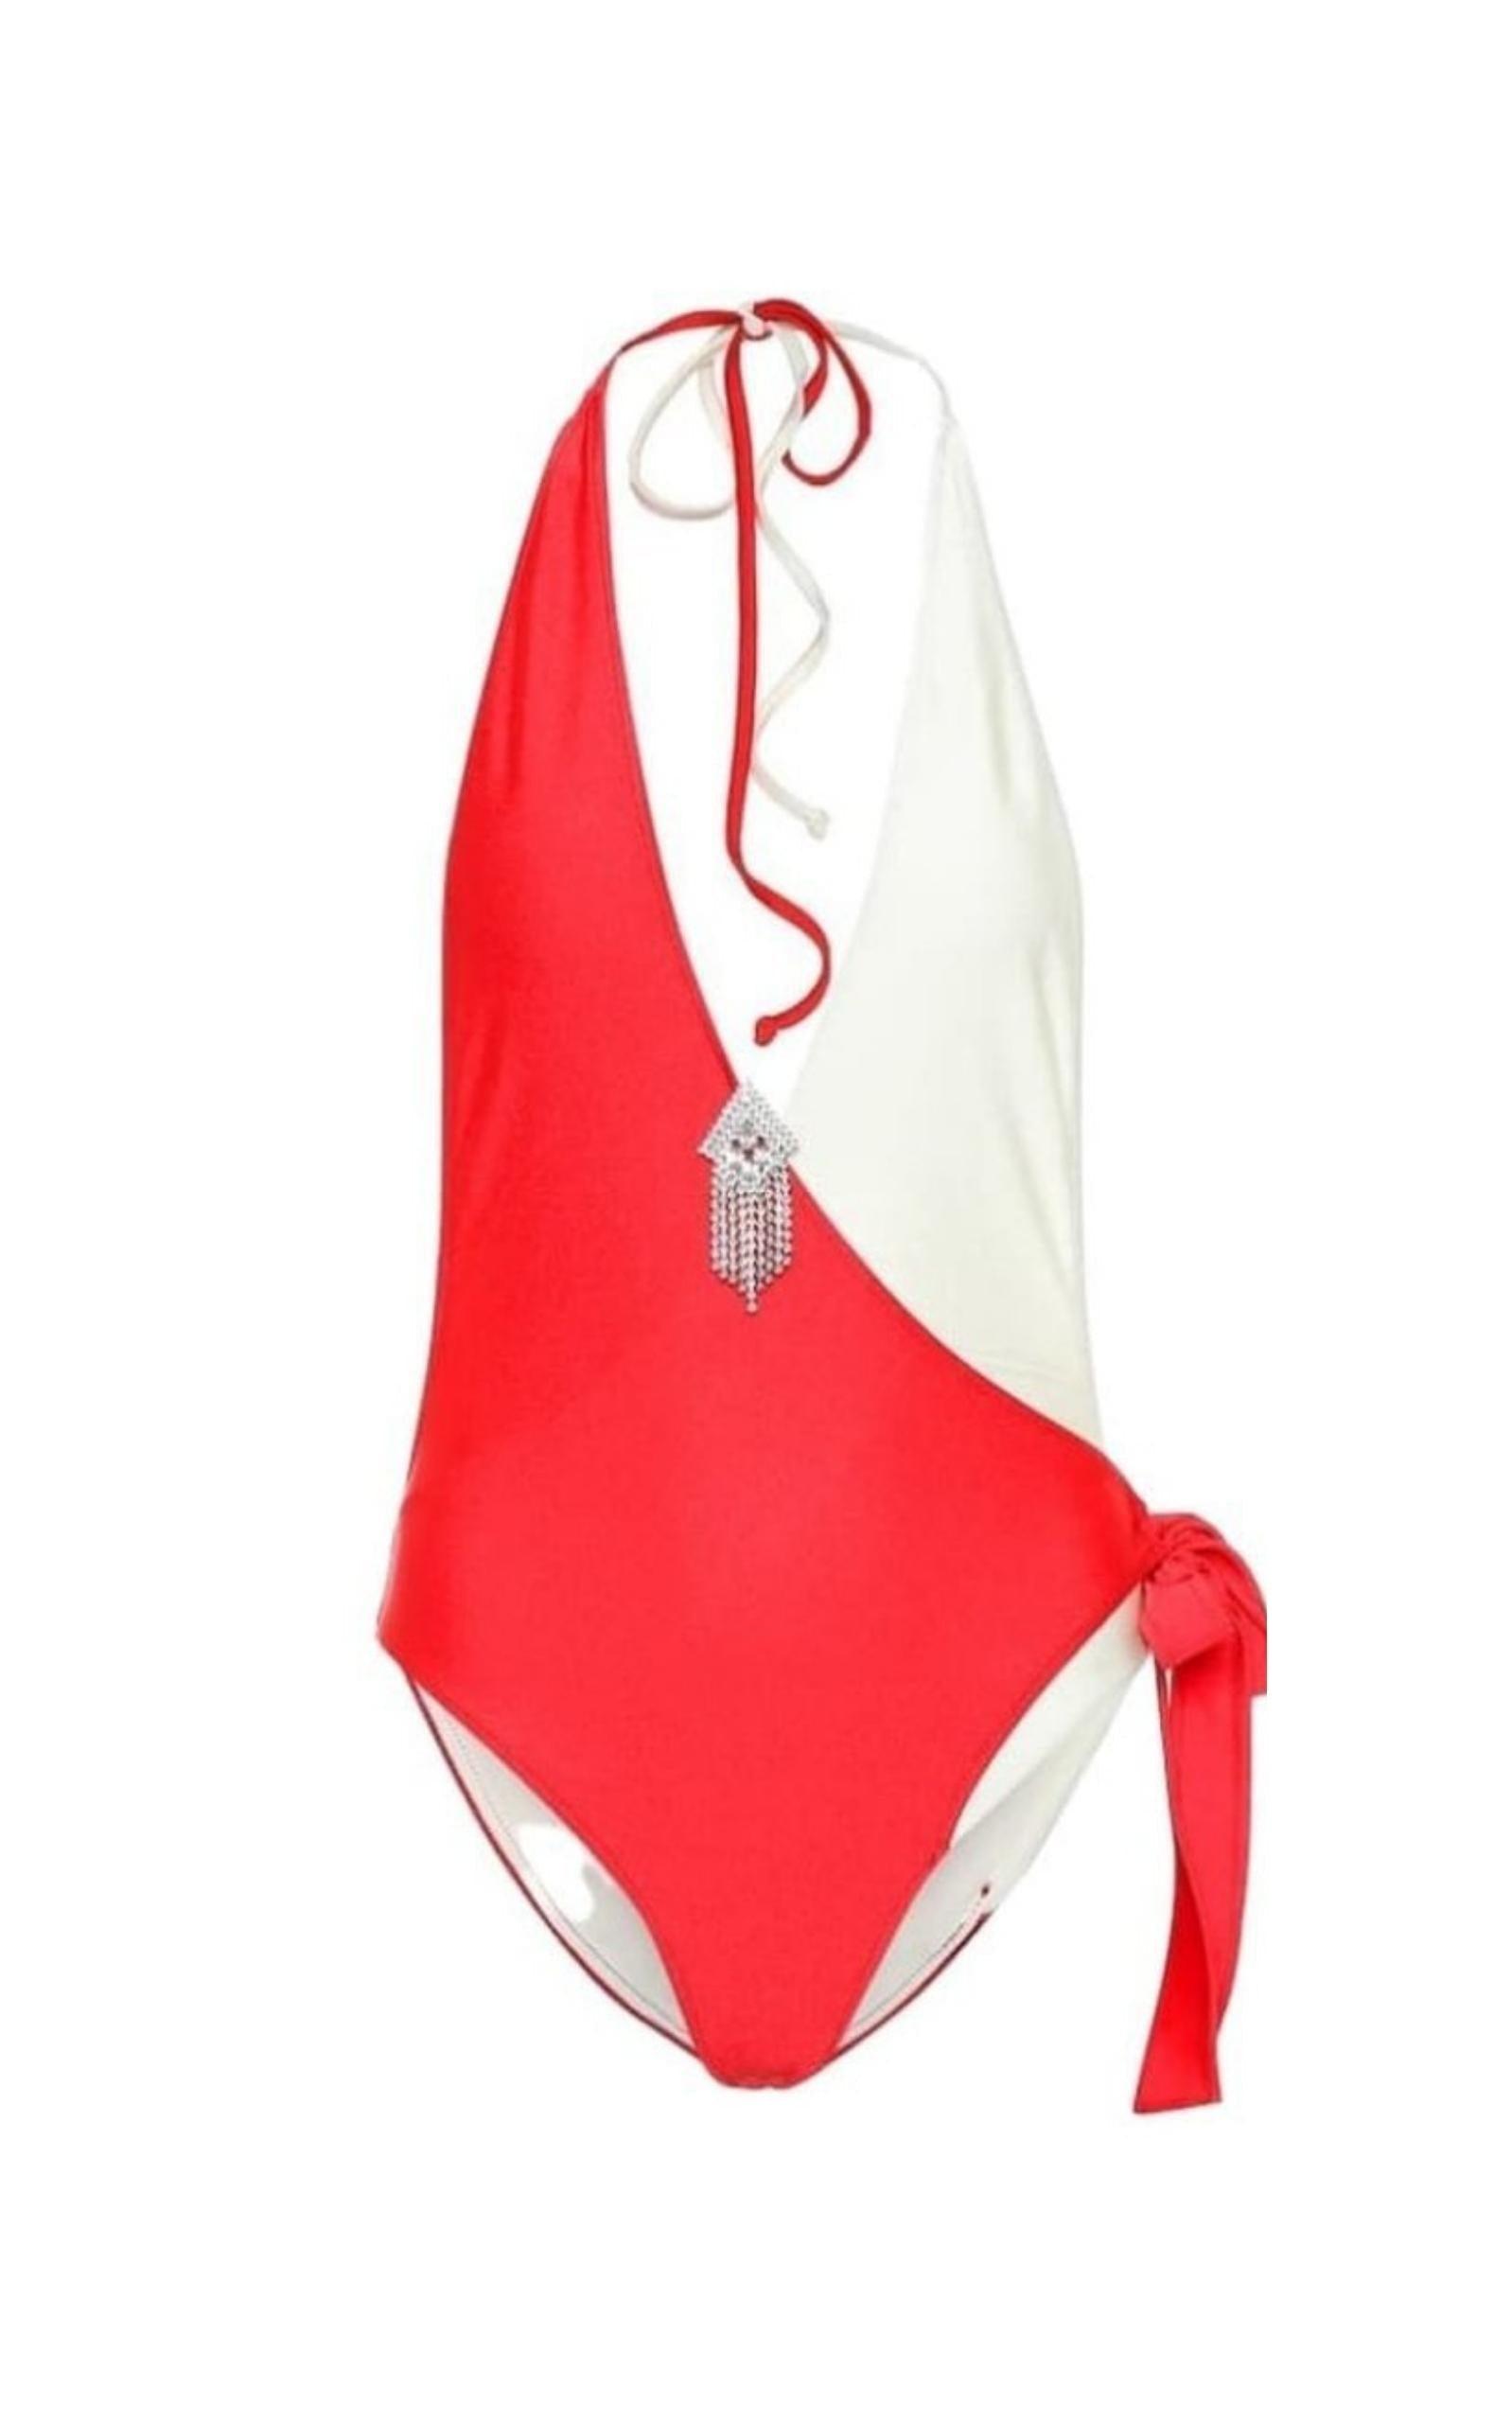 Gucci Embellished Colorblocked White & Red Swimsuit